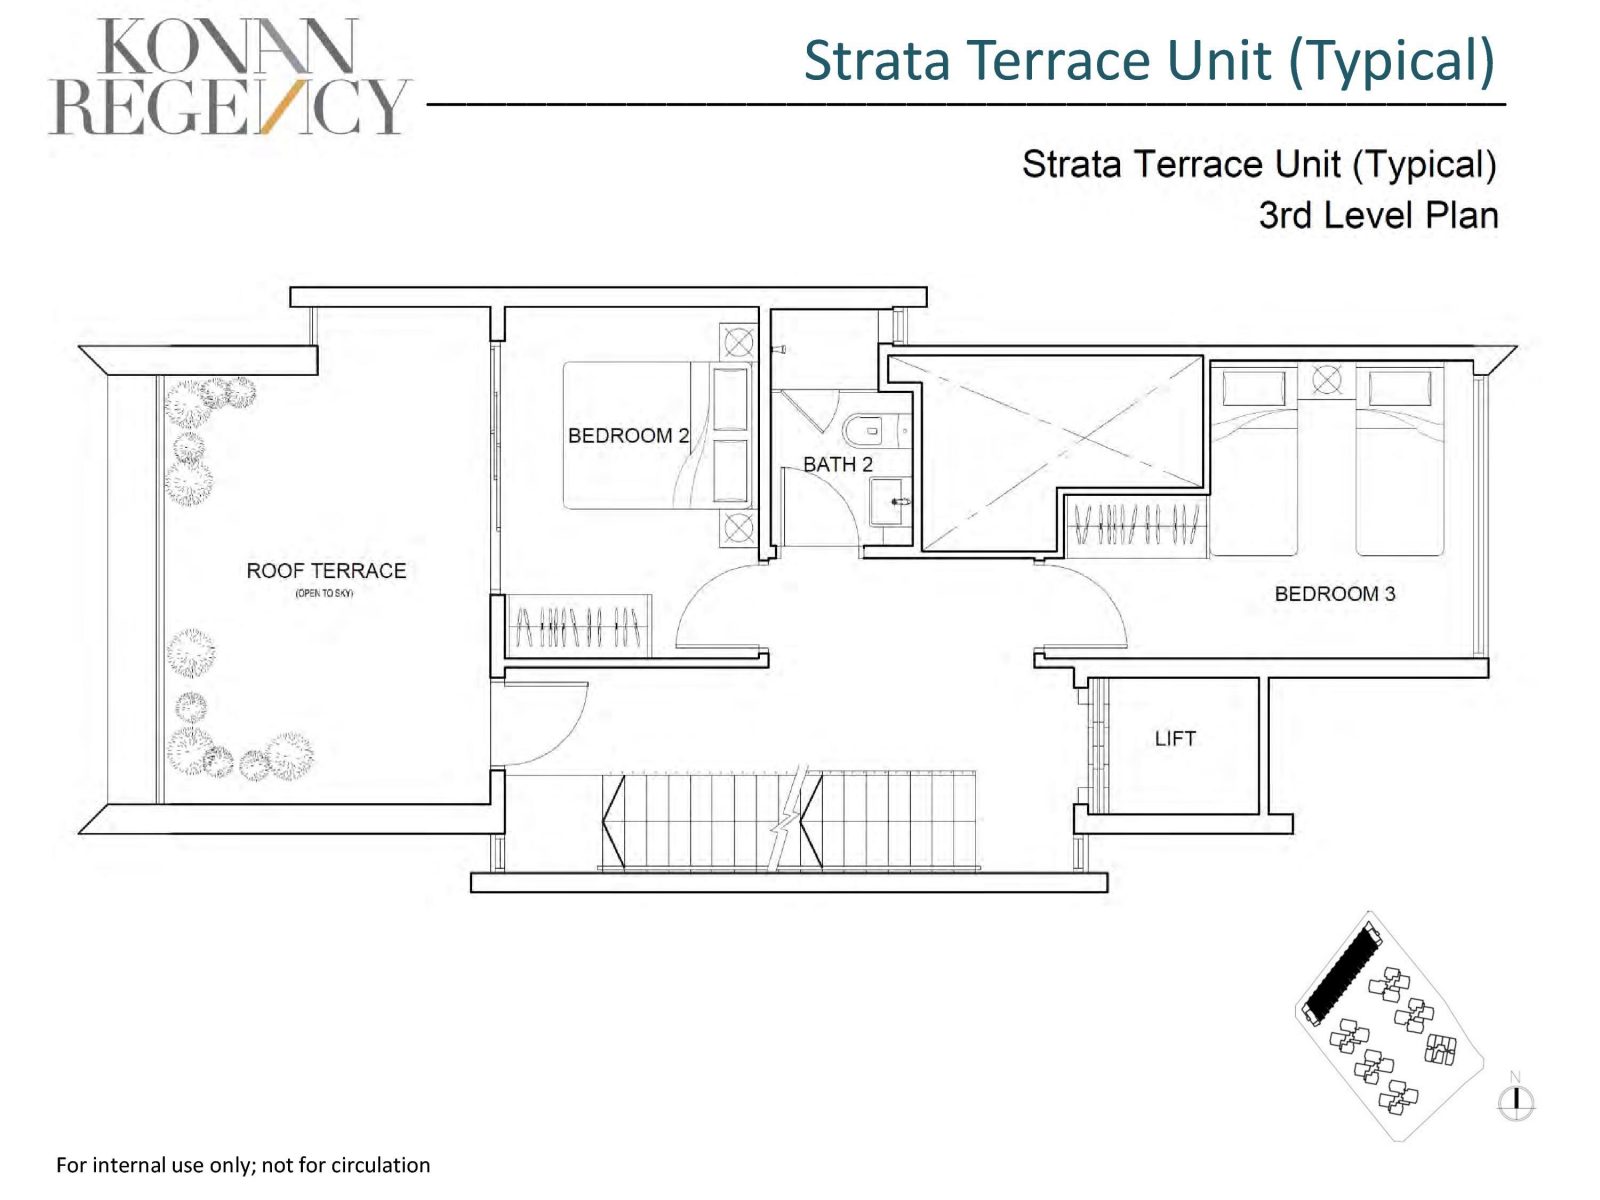 Strata Terrace Typical 7